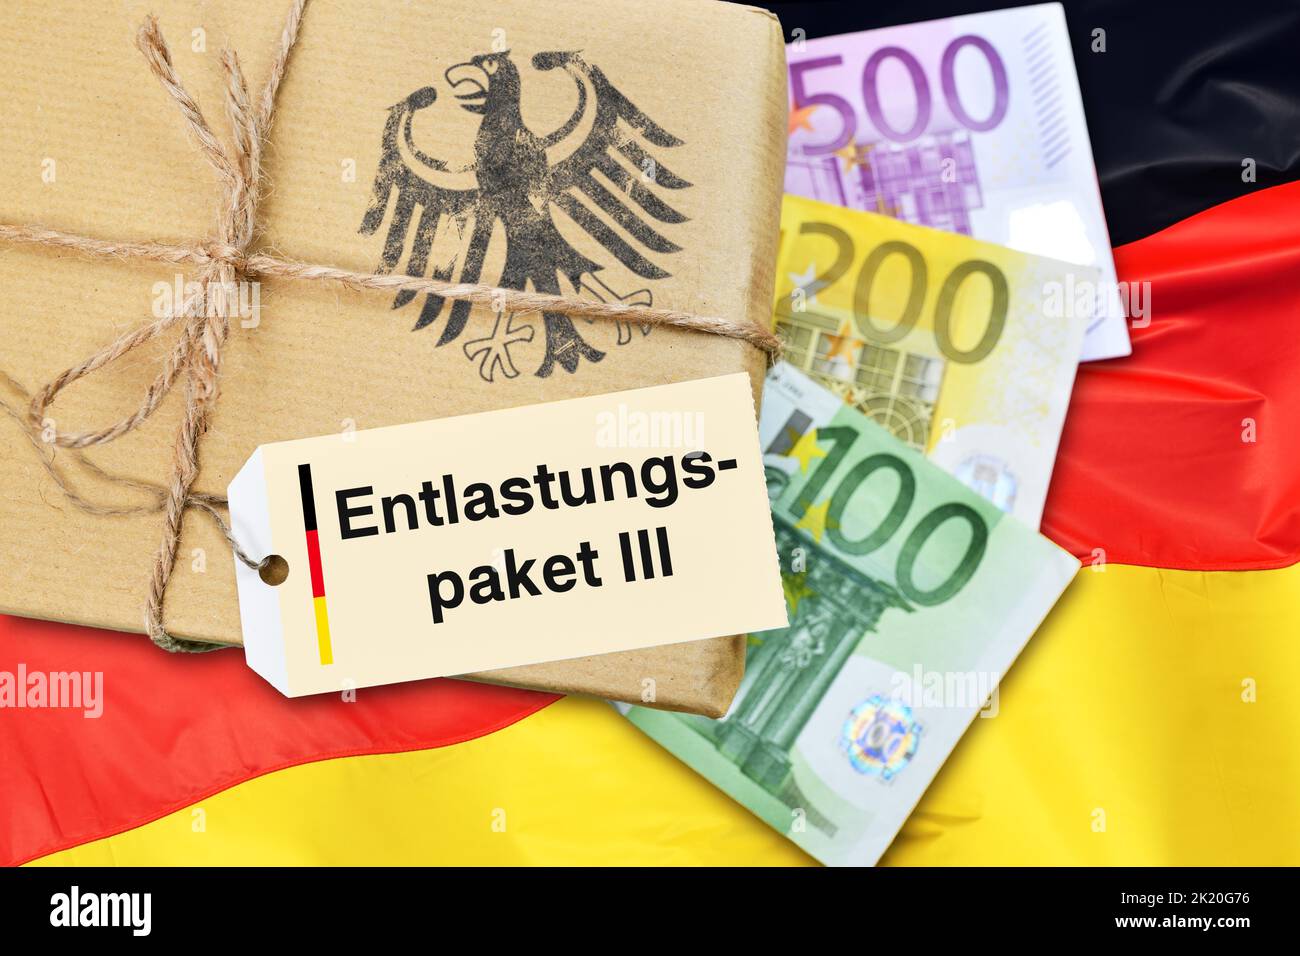 Package With Label And Inscription Discharge Package III With Banknotes And Germany Flag Stock Photo